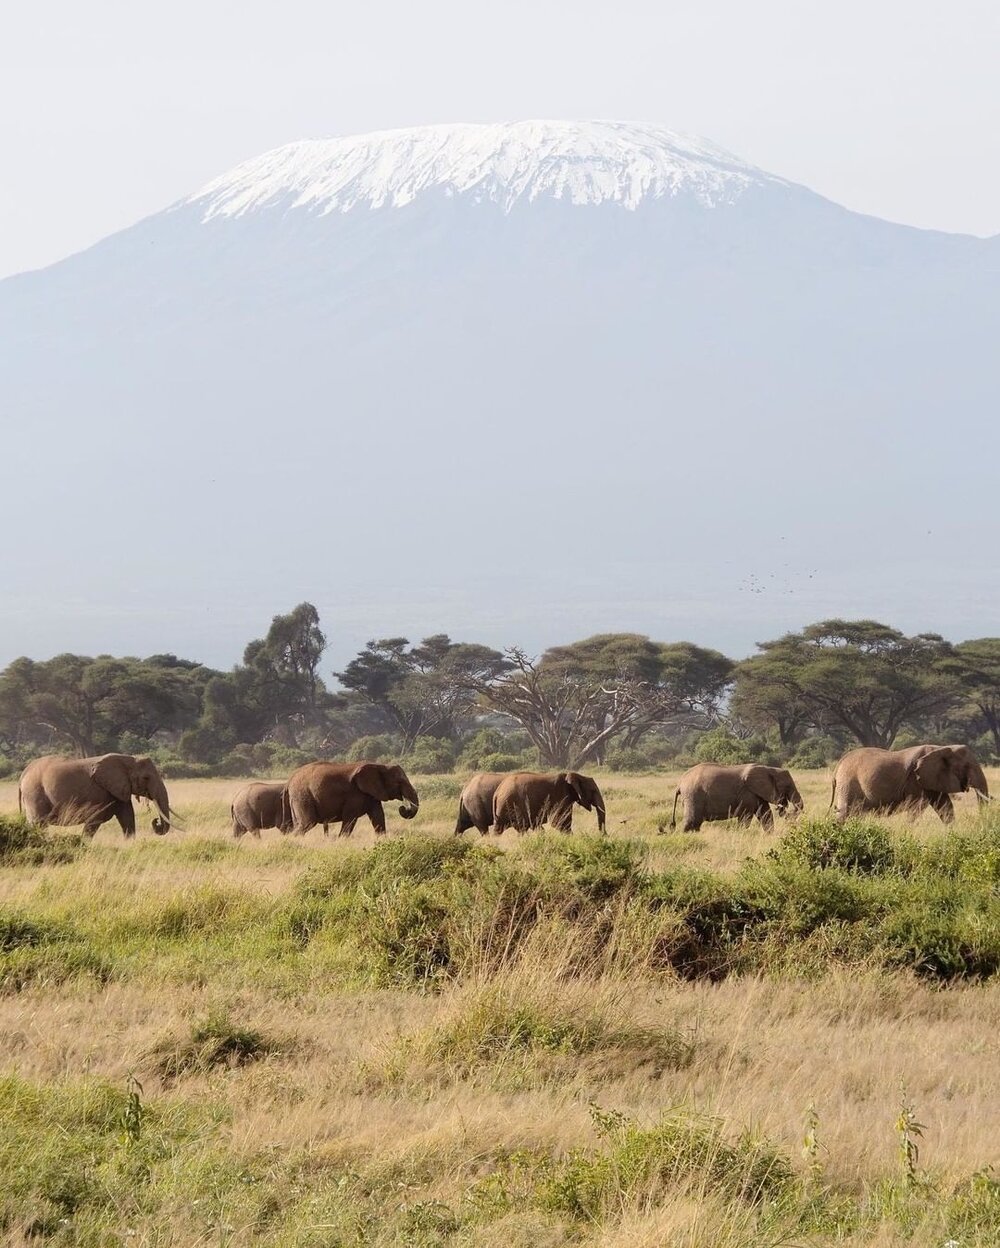 The park is renowned for its iconic view of Mount Kilimanjaro. Image: Cate Misczuk